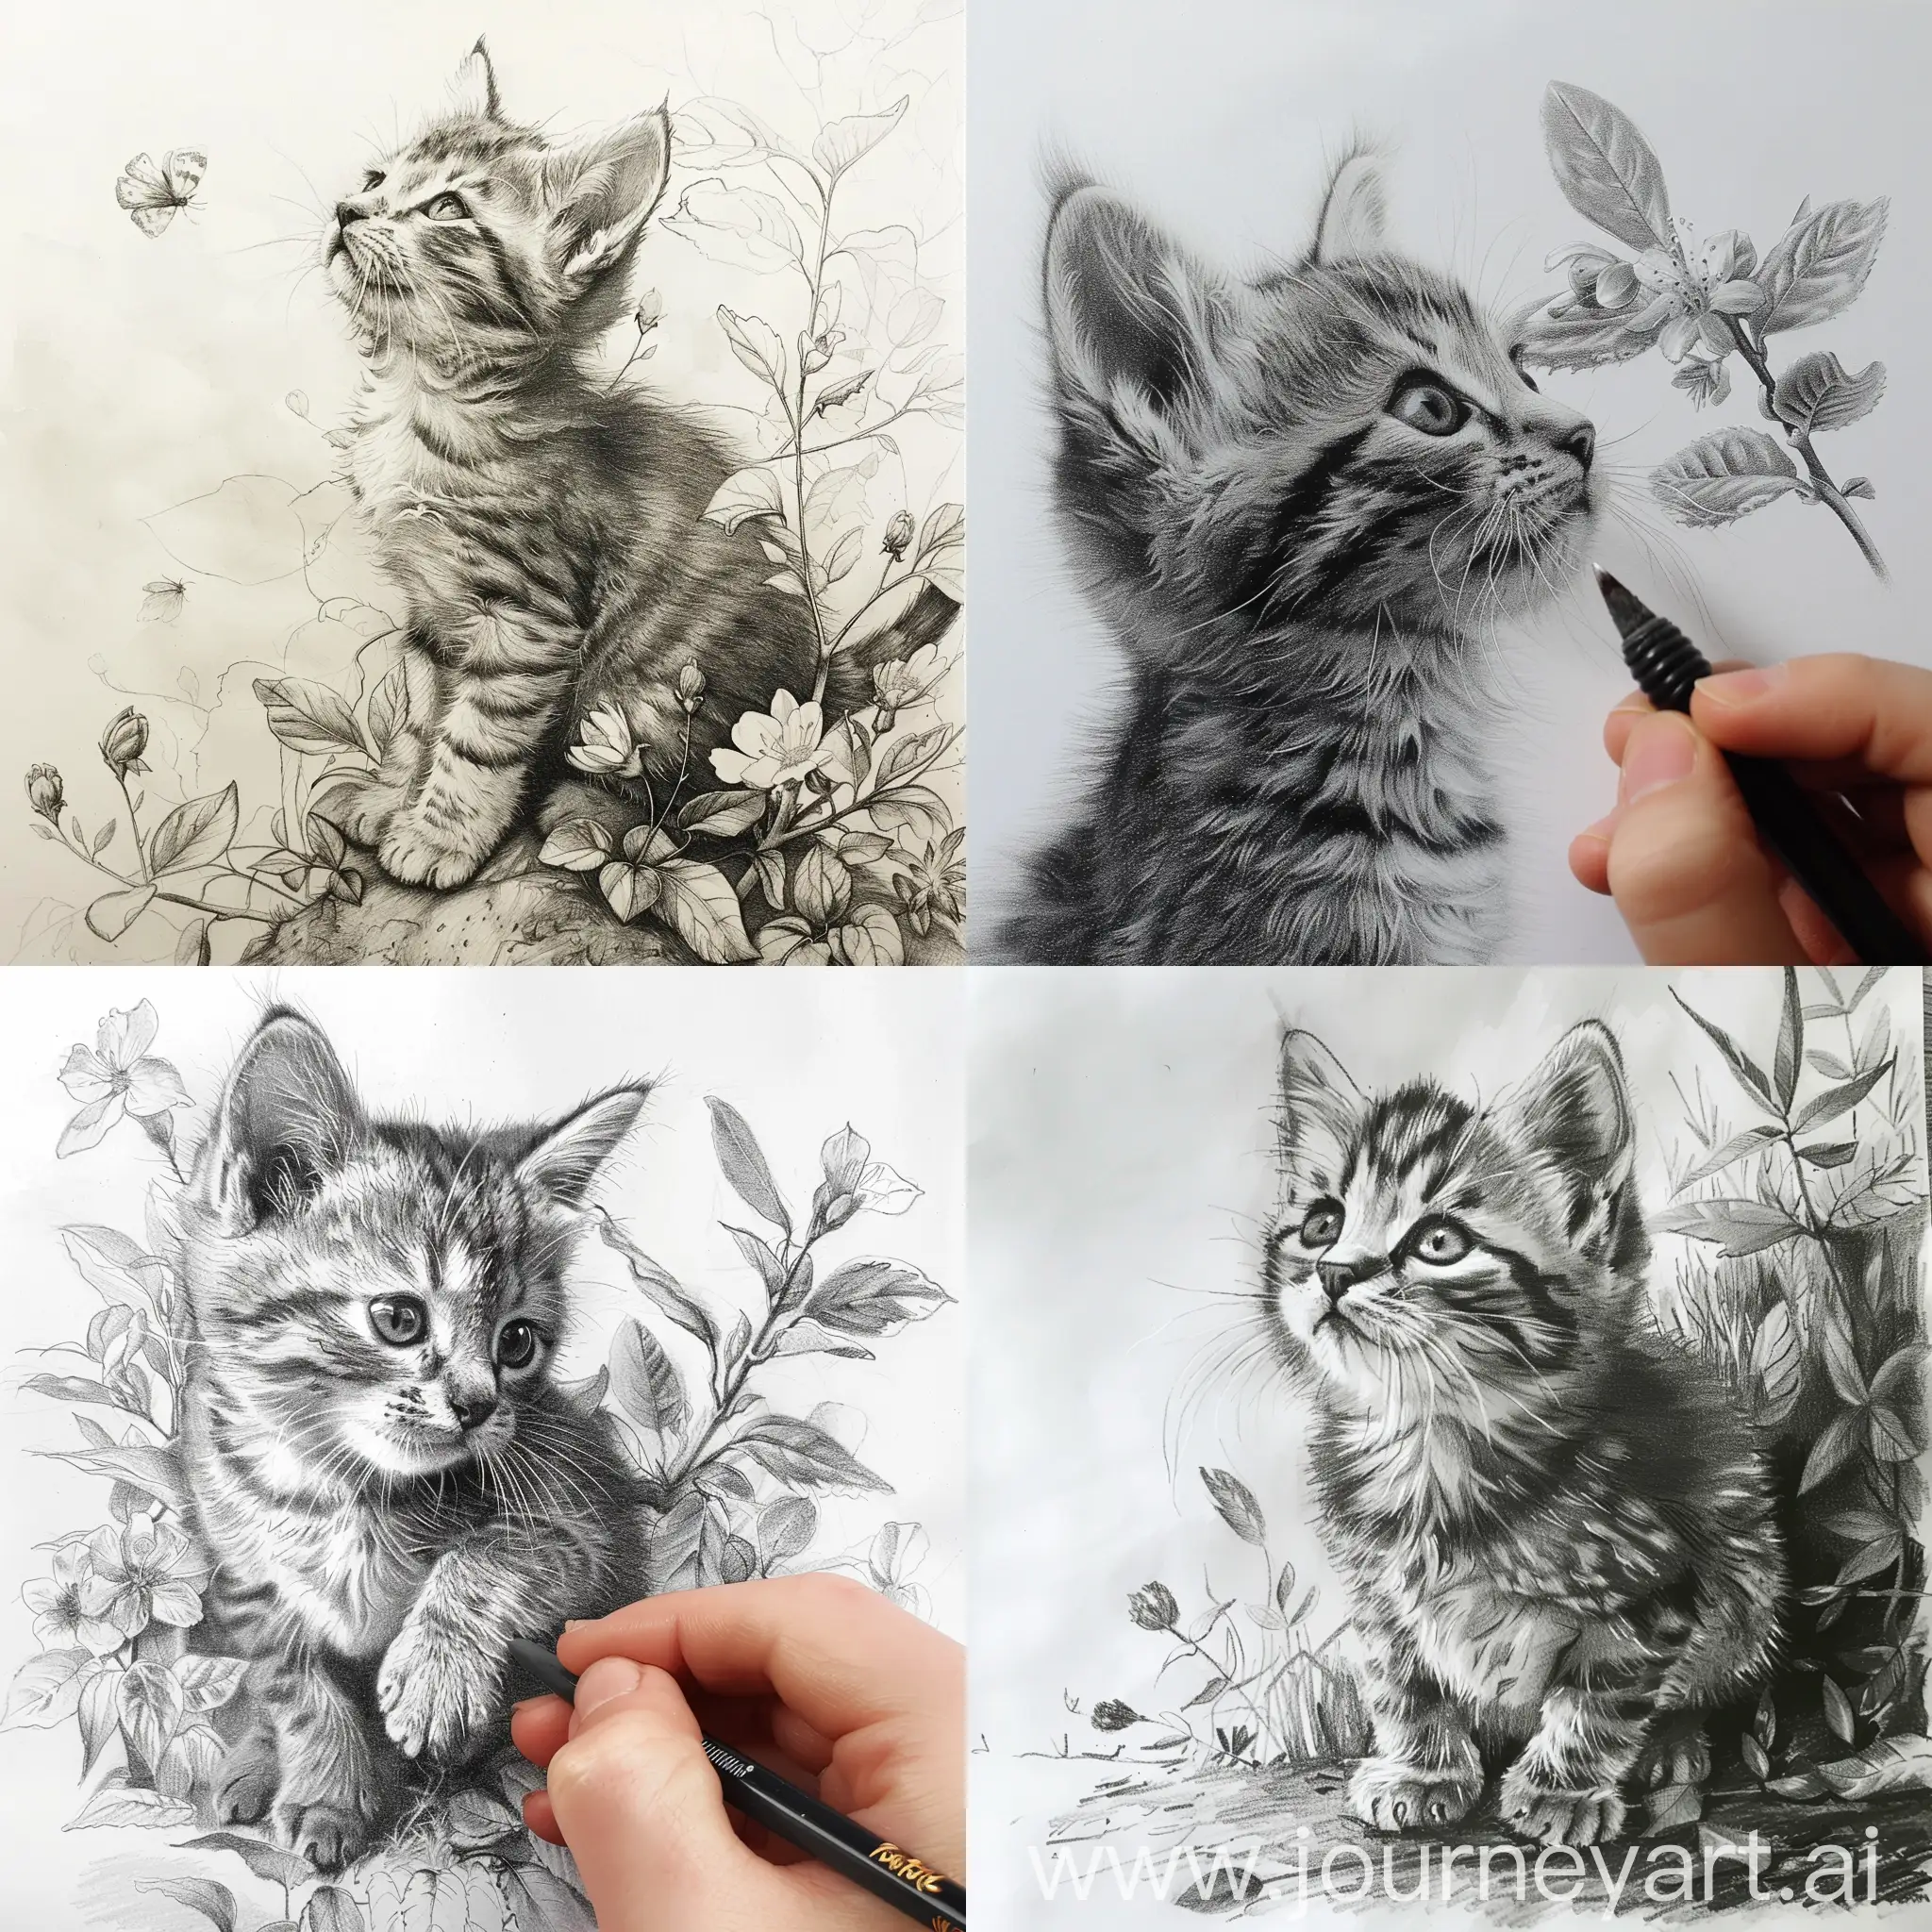 Natural-Scene-with-Playful-Kitten